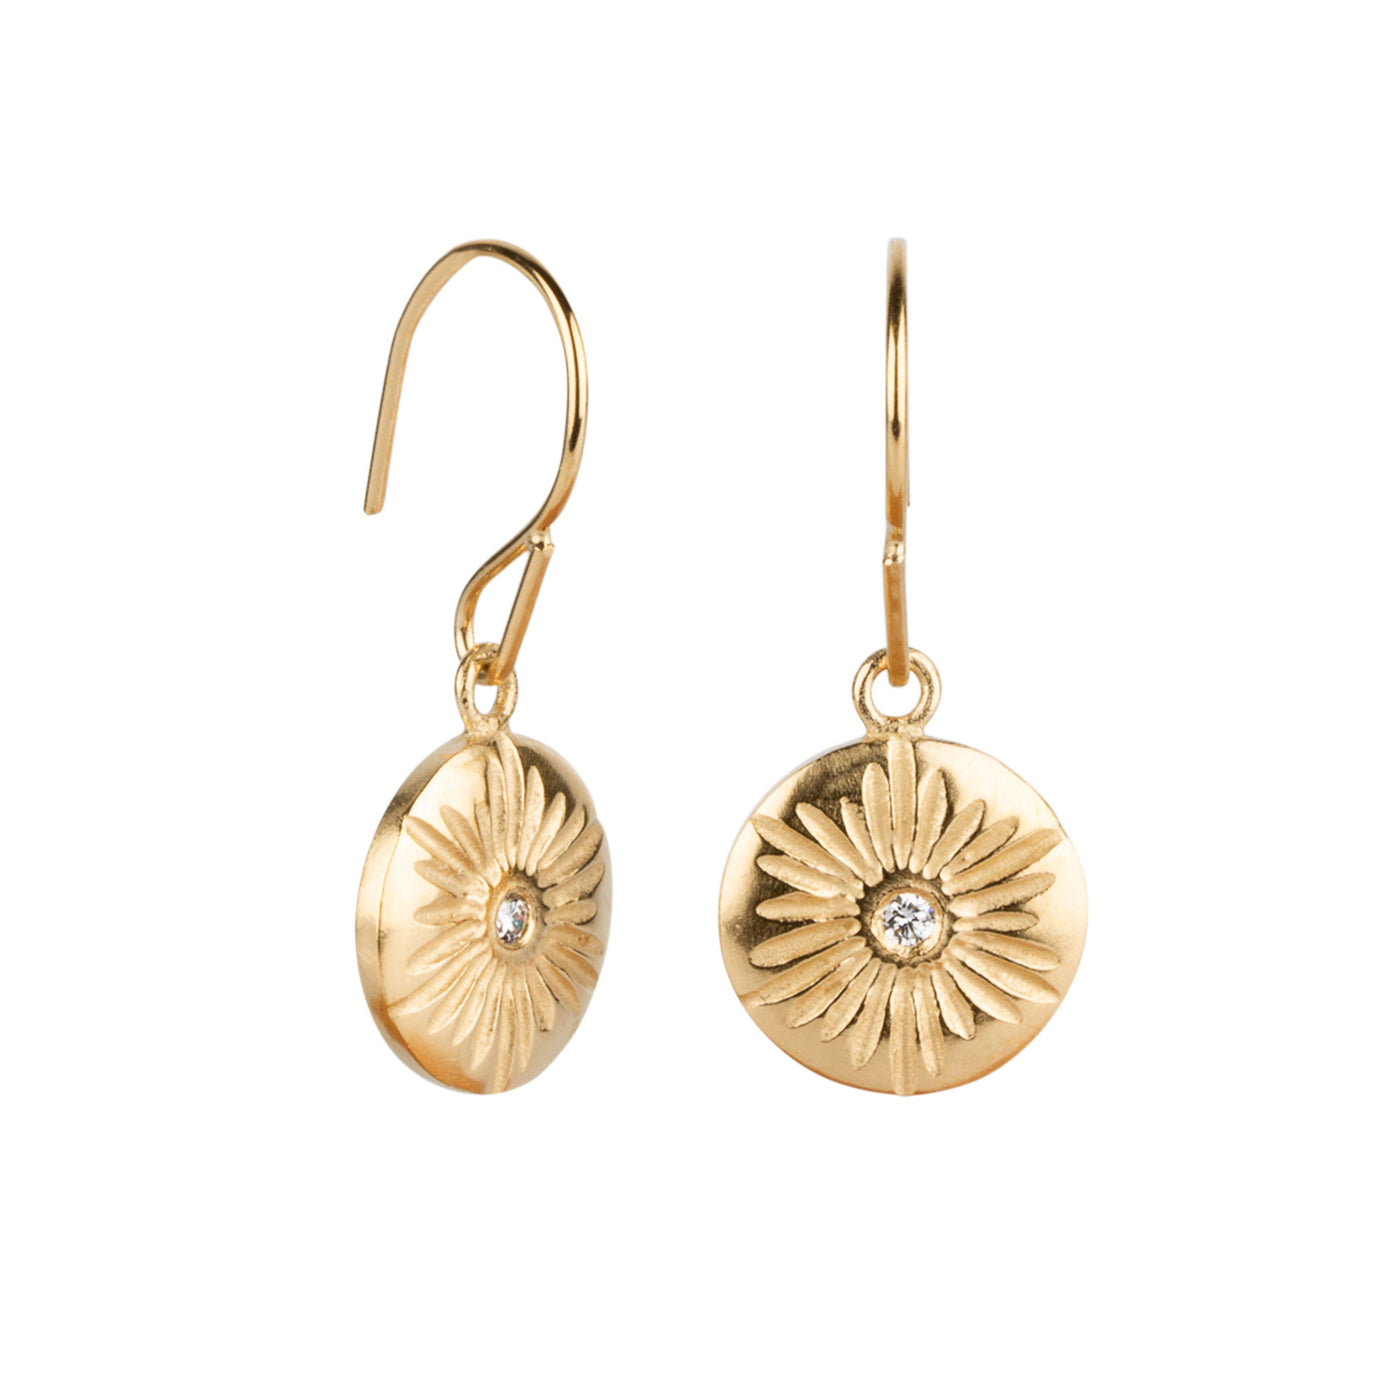 Lucia Large Dangle Earrings in Vermeil side view on a white background | Corey Egan